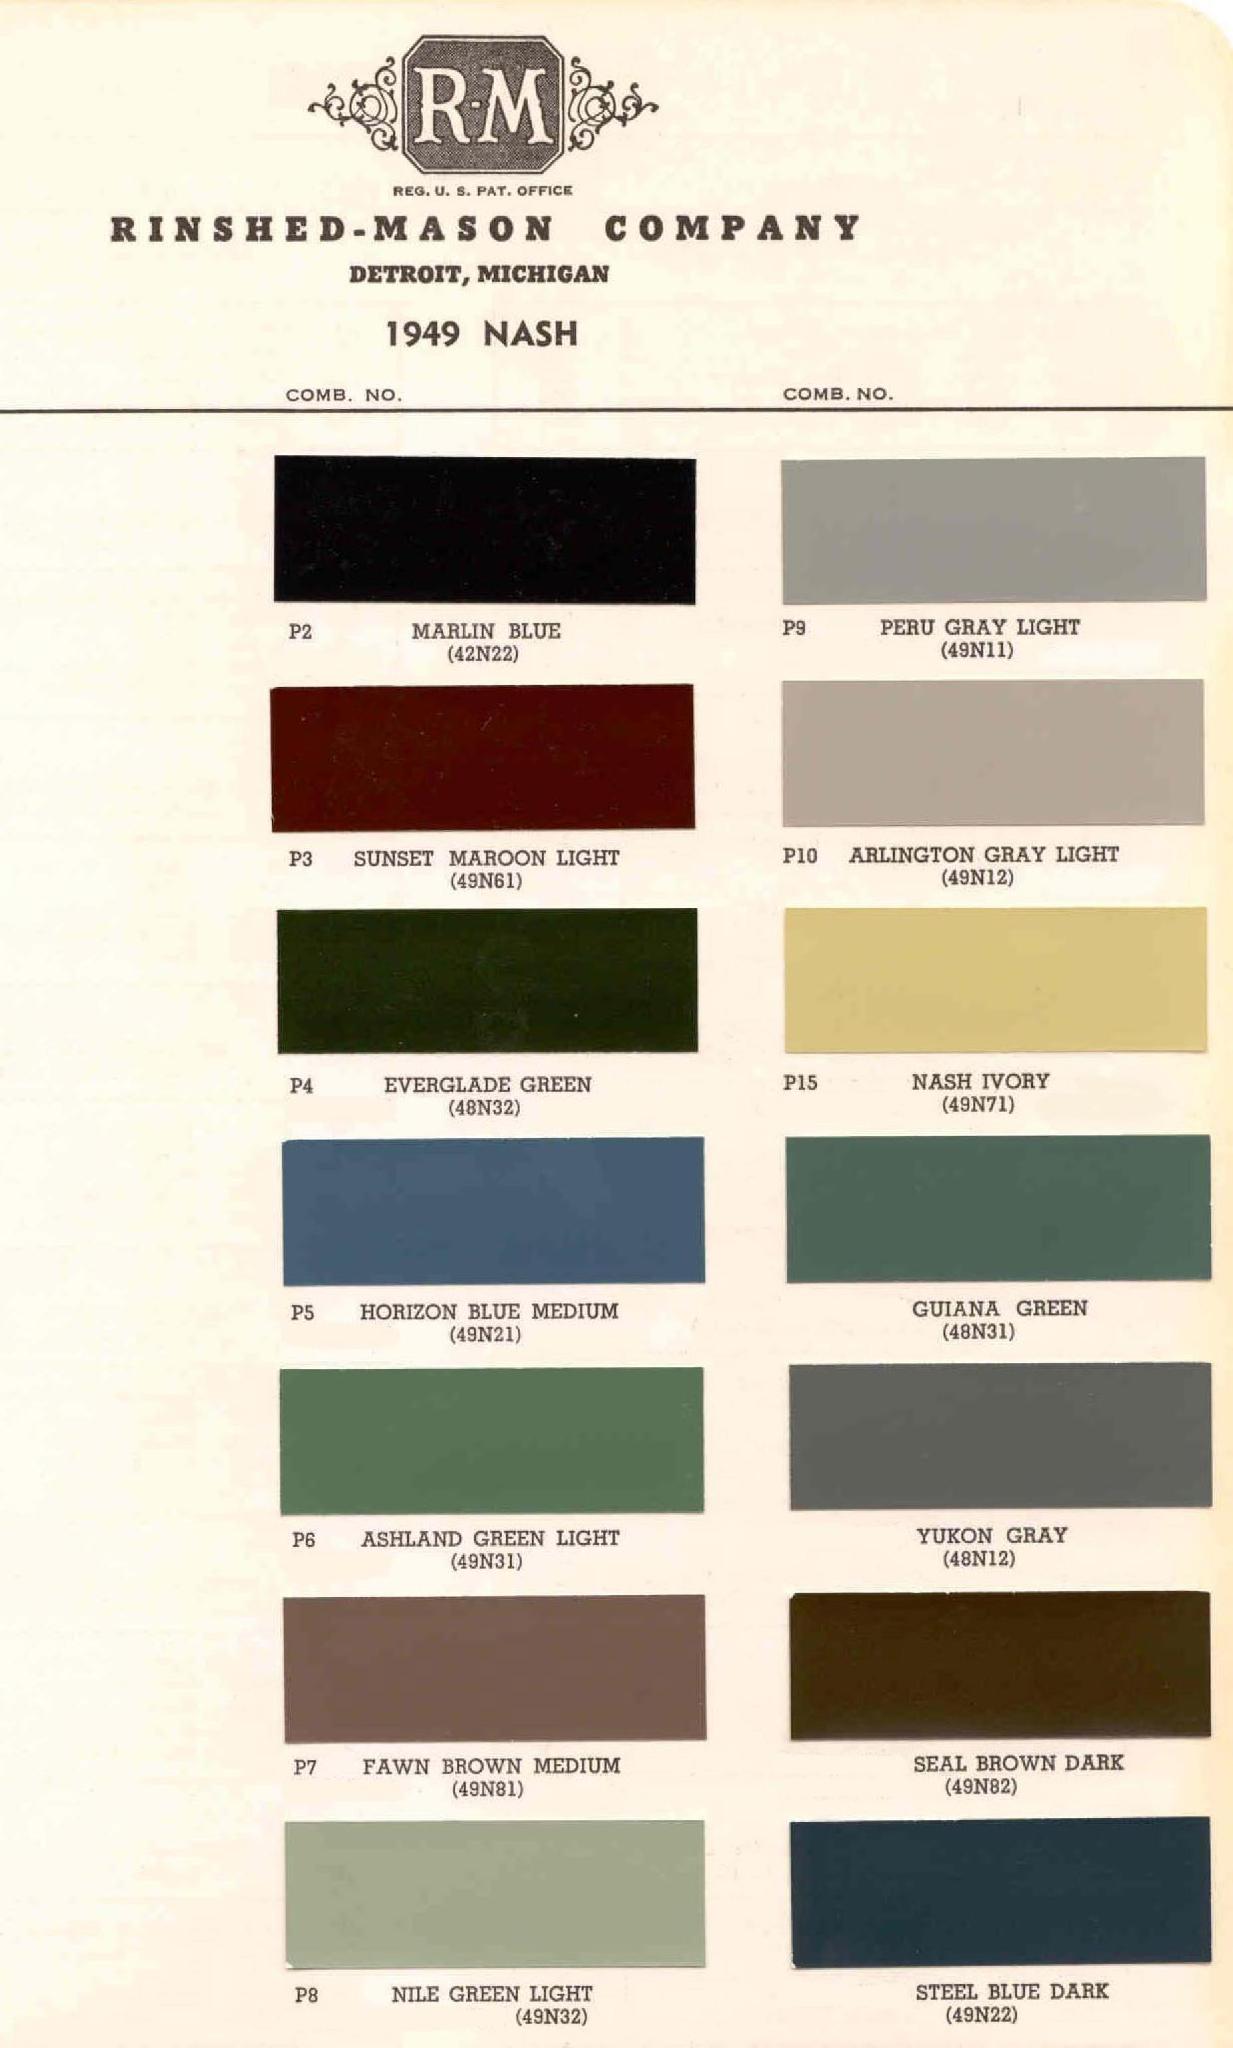 Colors and Codes used on Exterior Vehicles